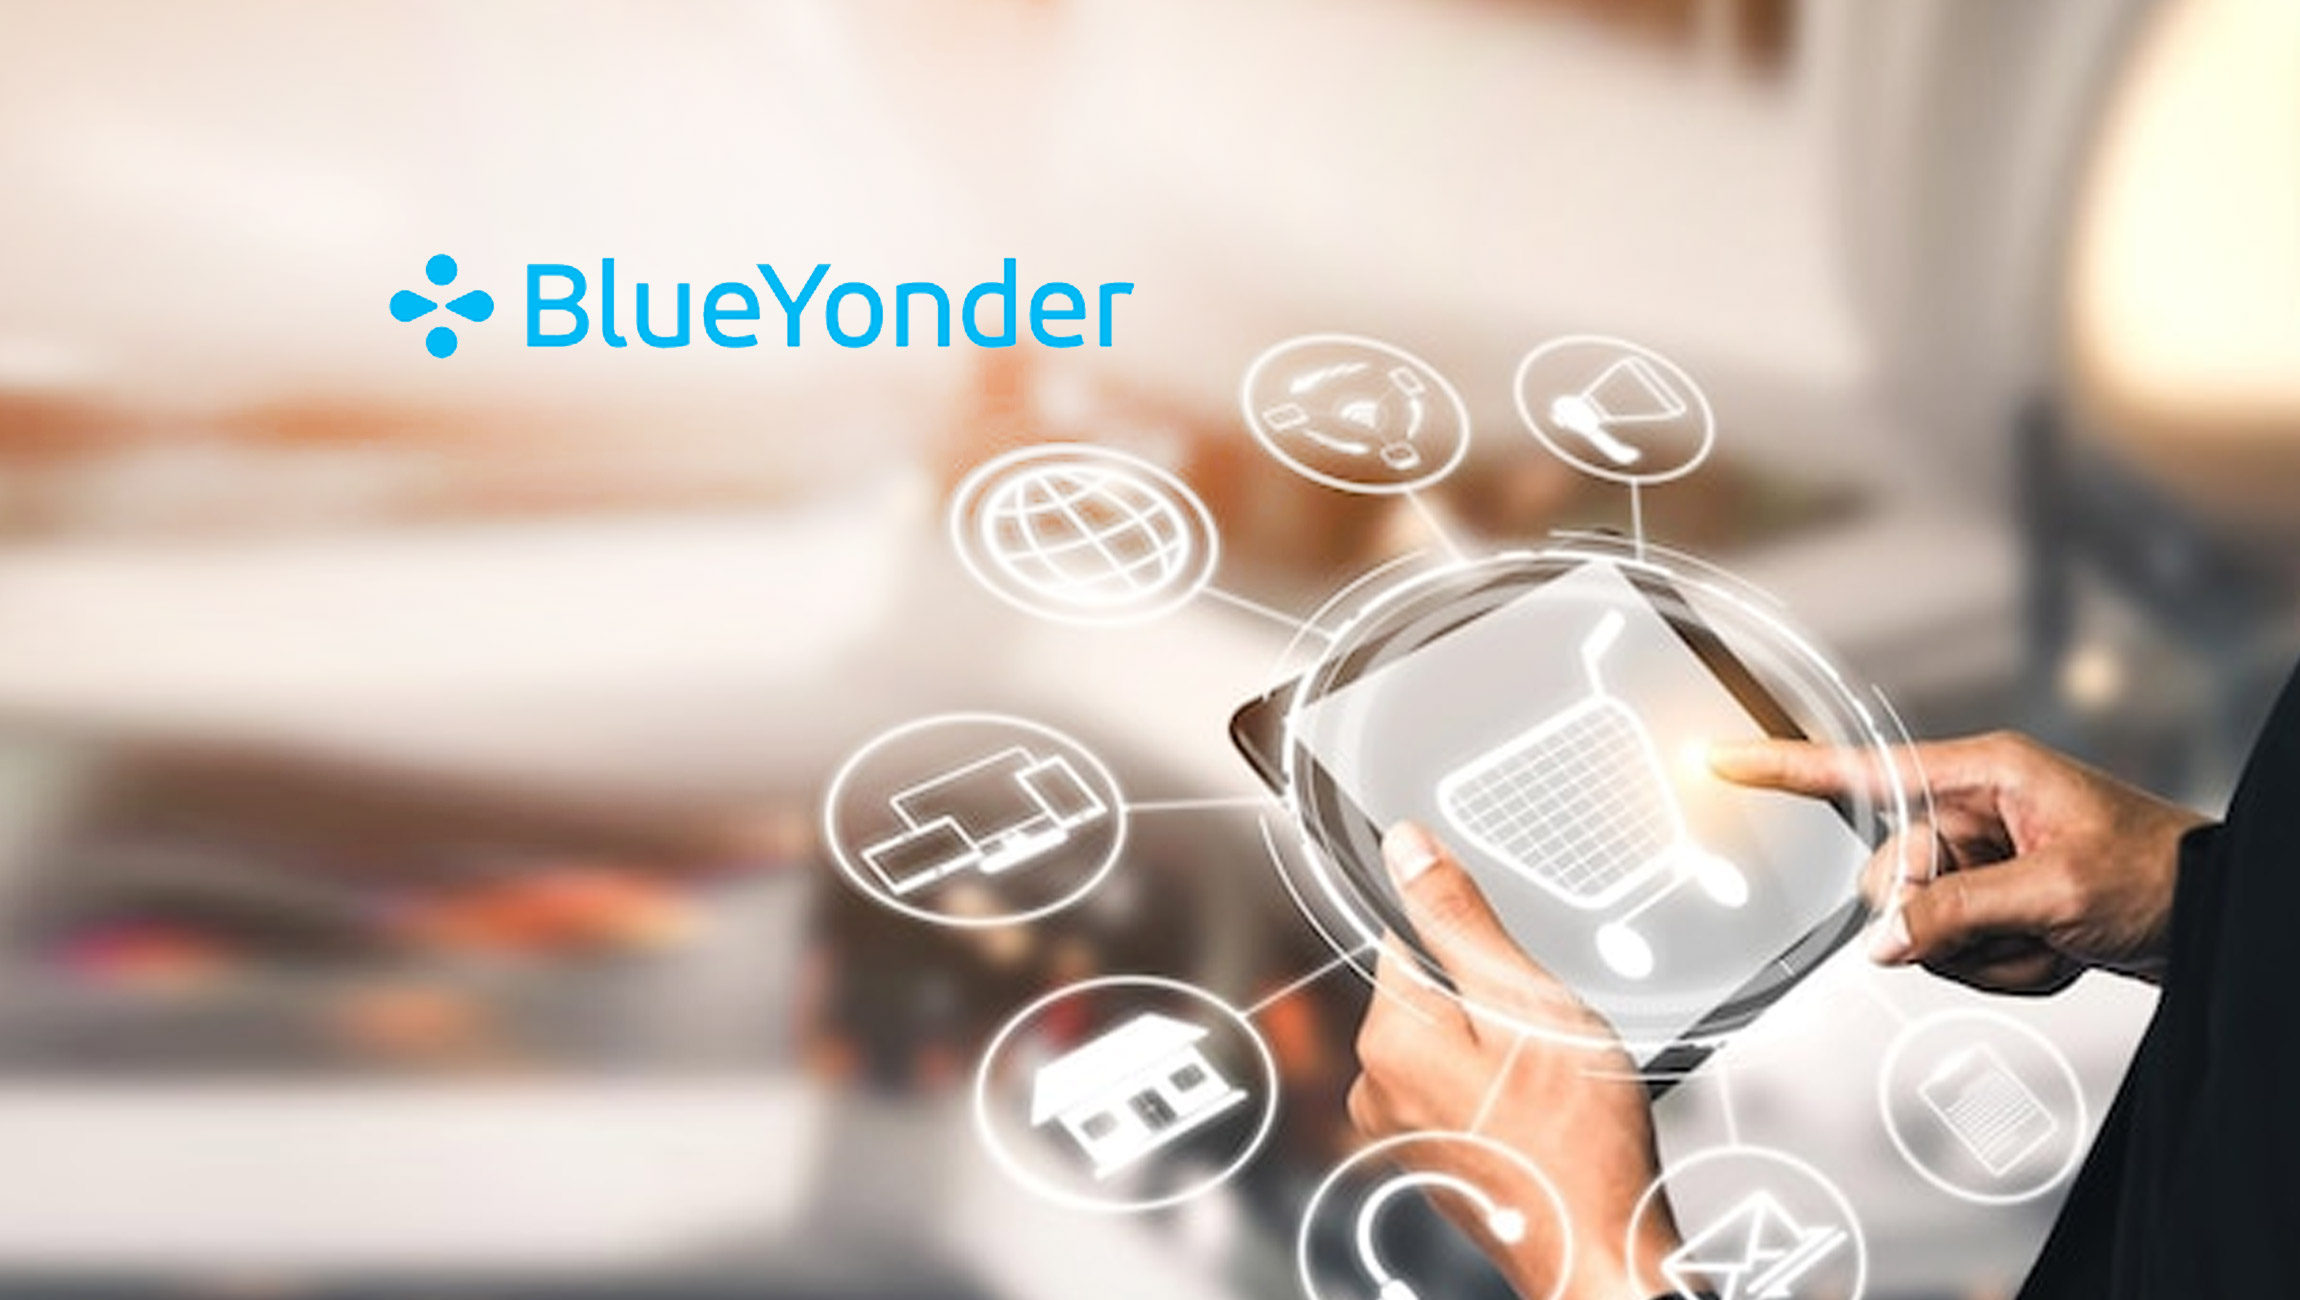 Blue Yonder Recognized as a Leader in Nucleus Research Control Tower Technology Value Matrix 2022